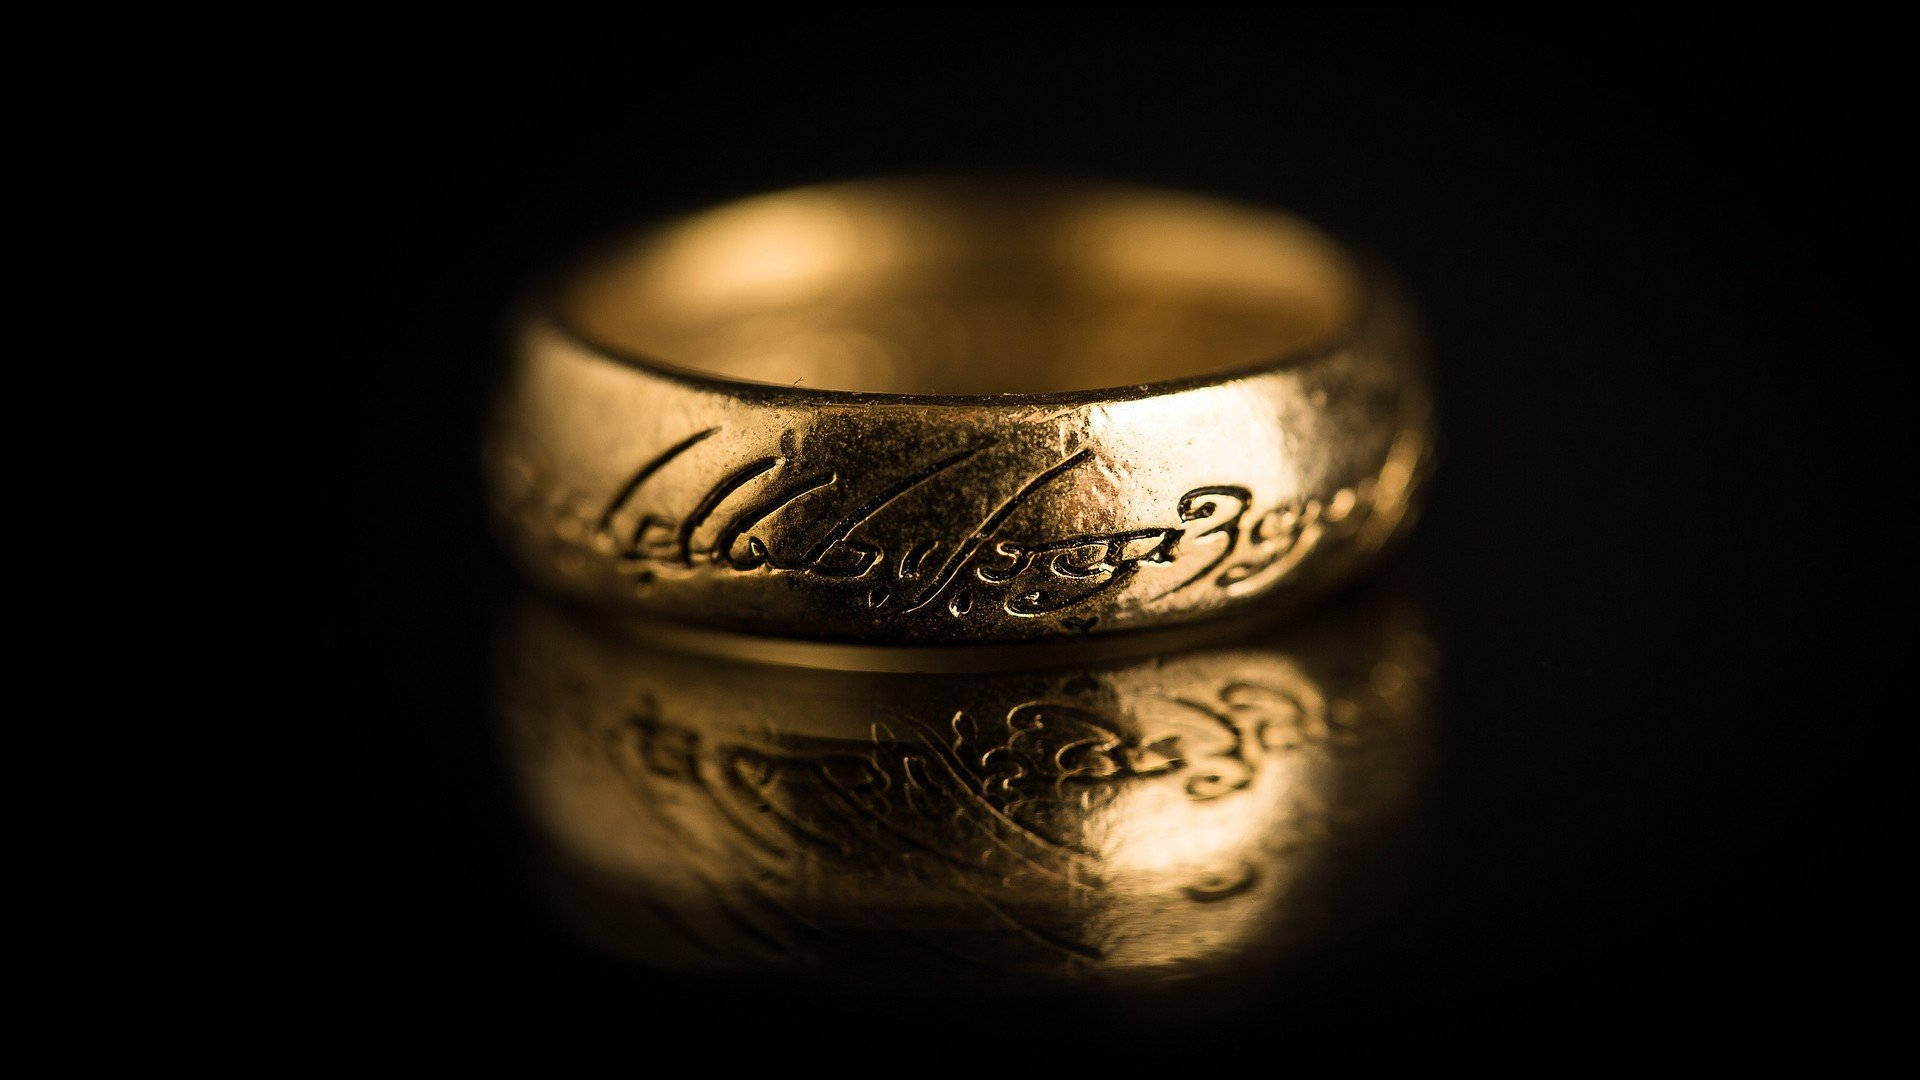 Jewelry Ring With Engraved Symbols